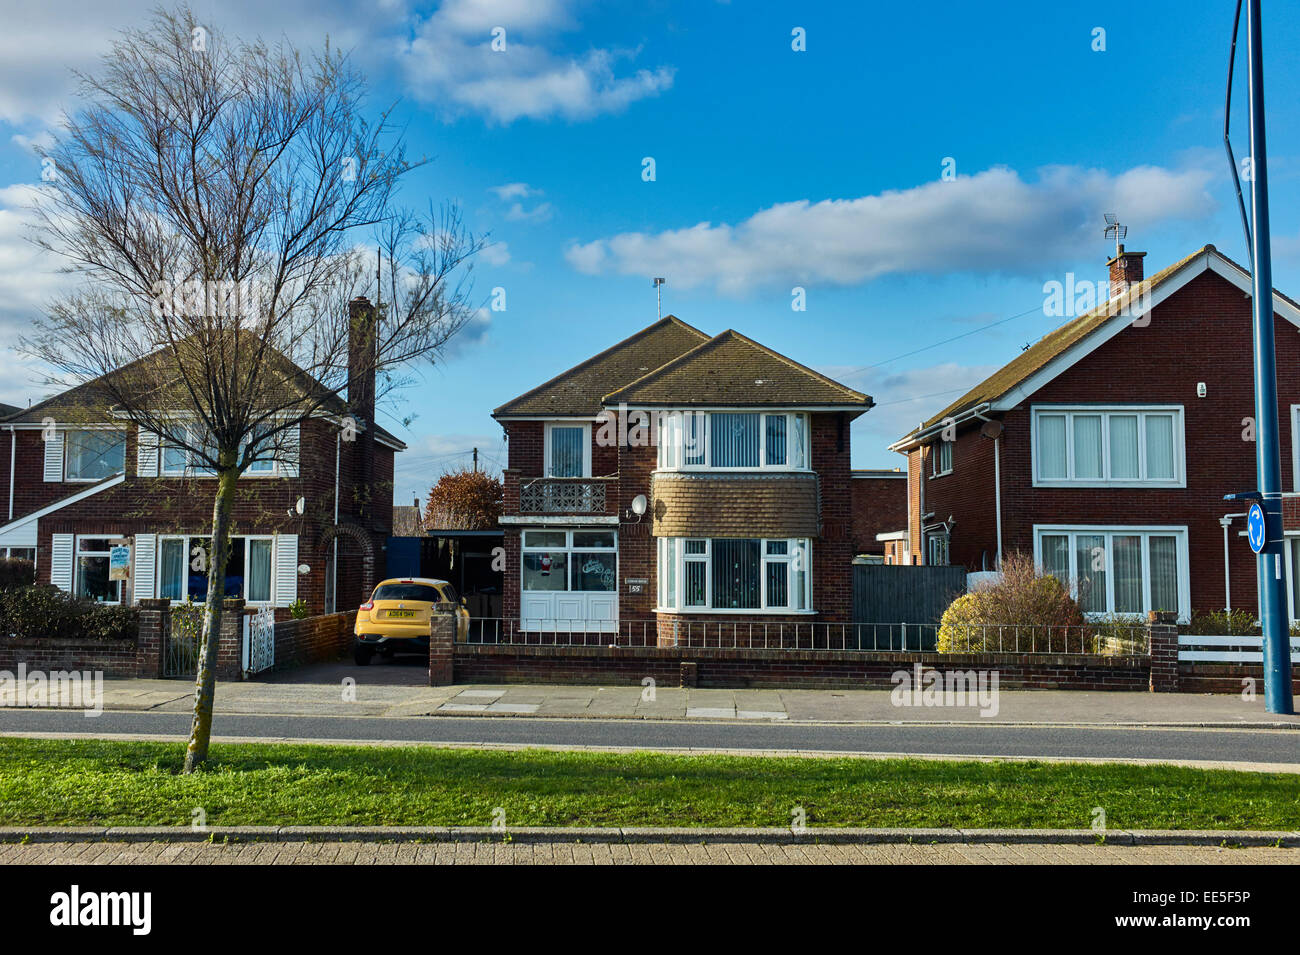 Detached suburban house, Great Yarmouth Stock Photo